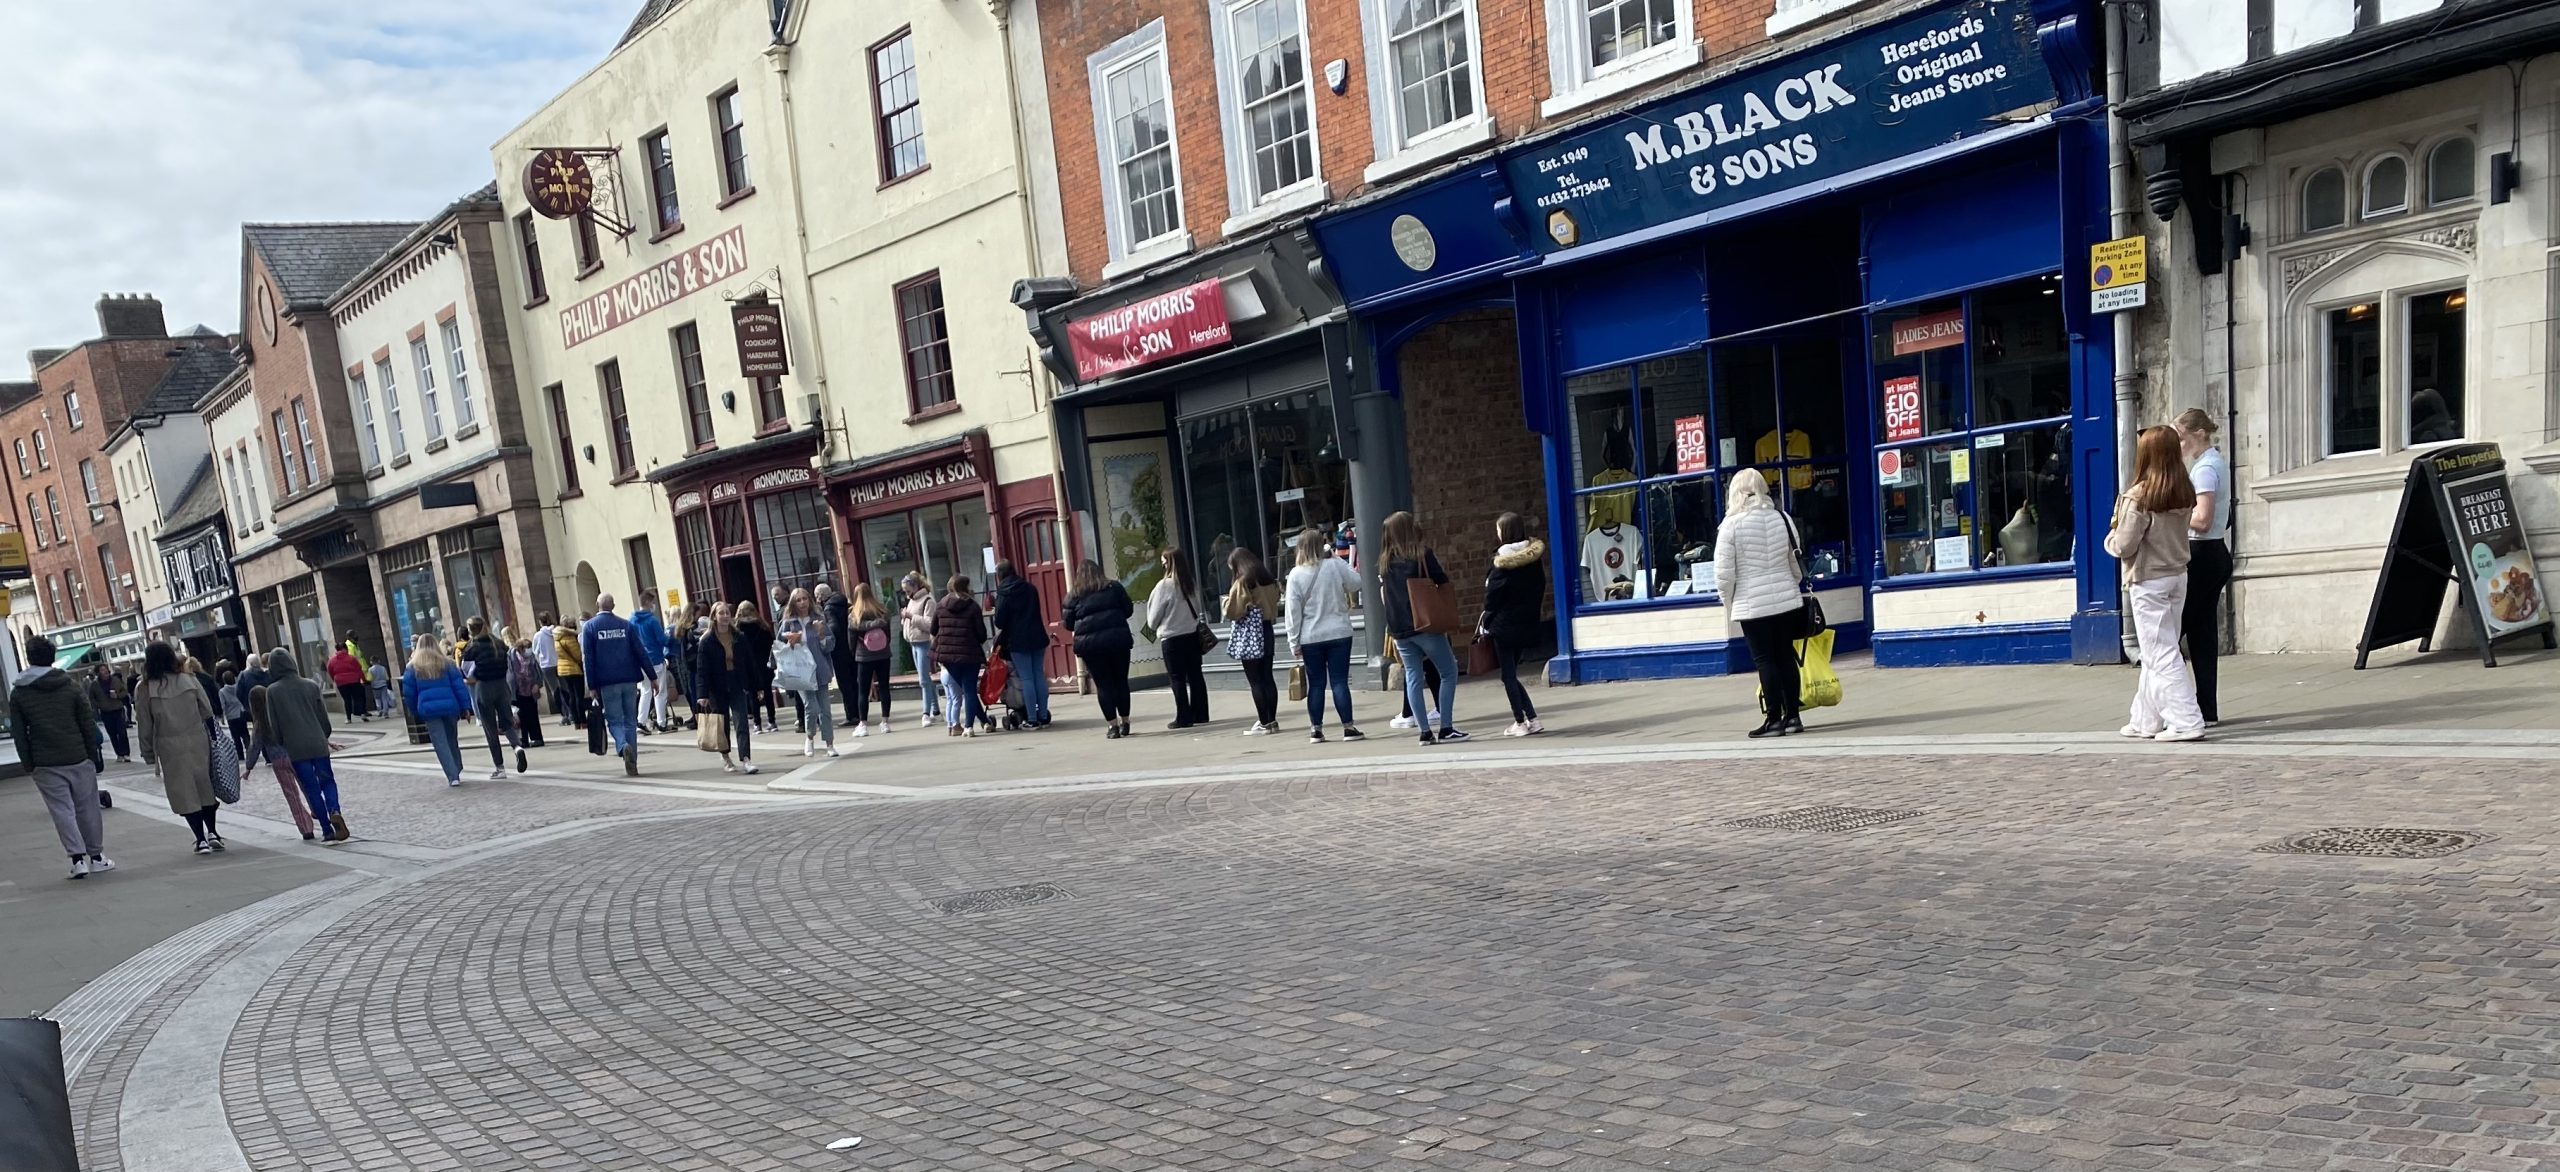 NEWS | Large queues outside stores in Hereford on second day of reopening